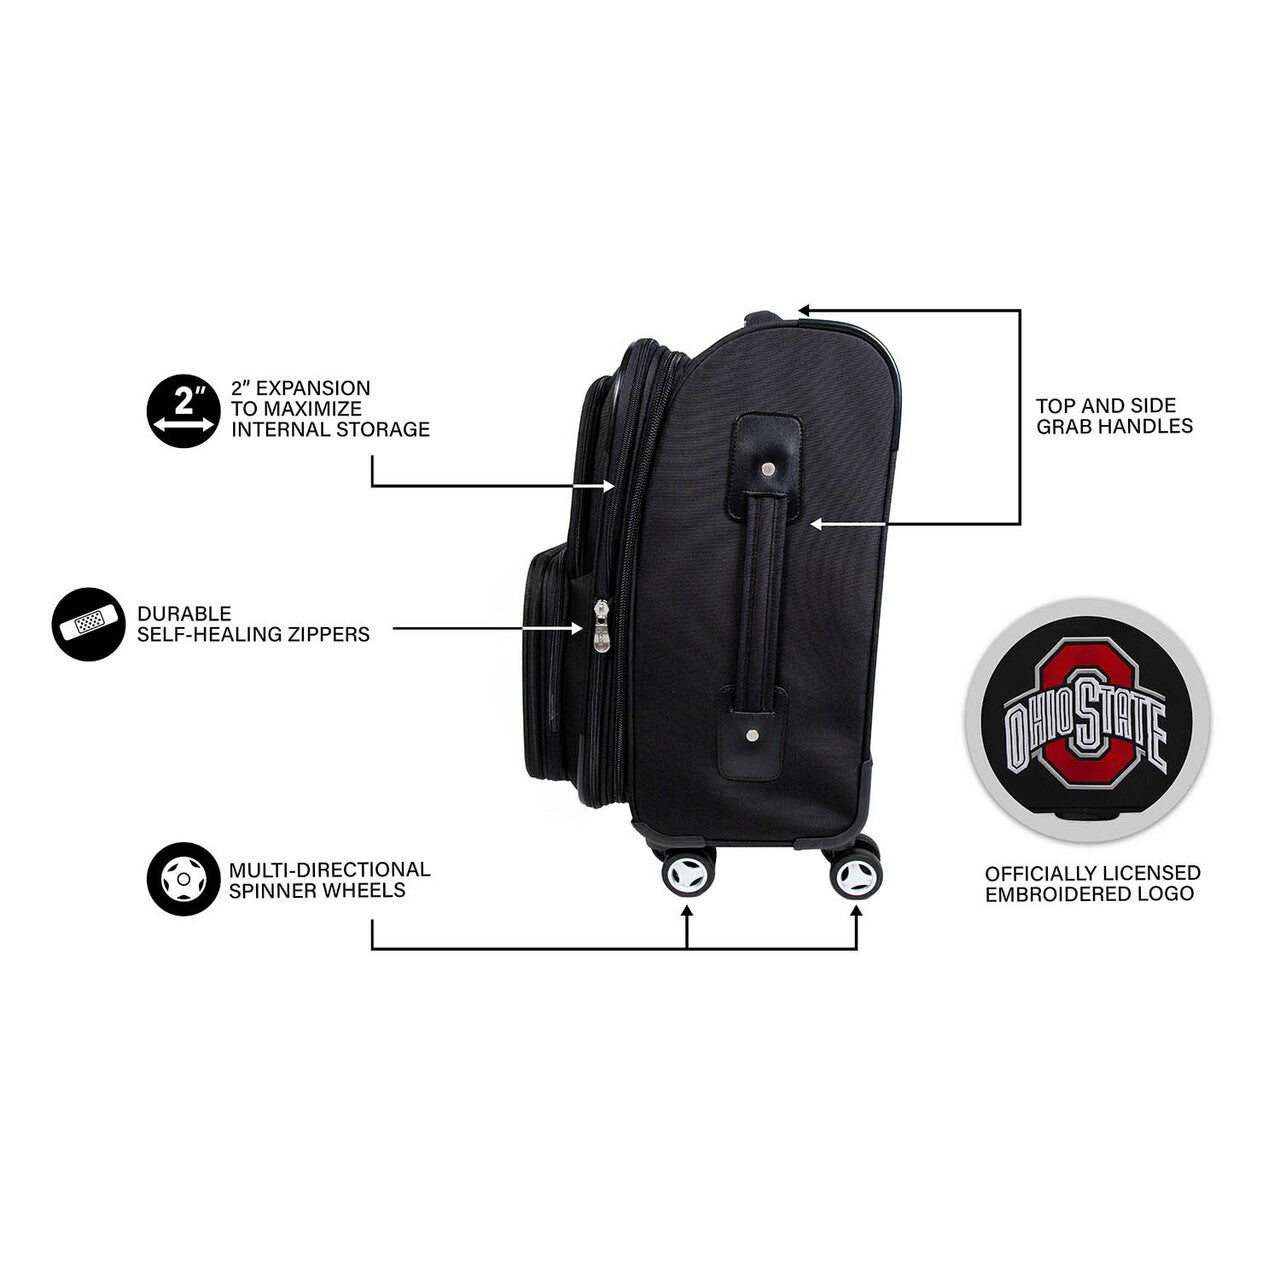 Vancouver Canucks 21" Carry-on Spinner Luggage